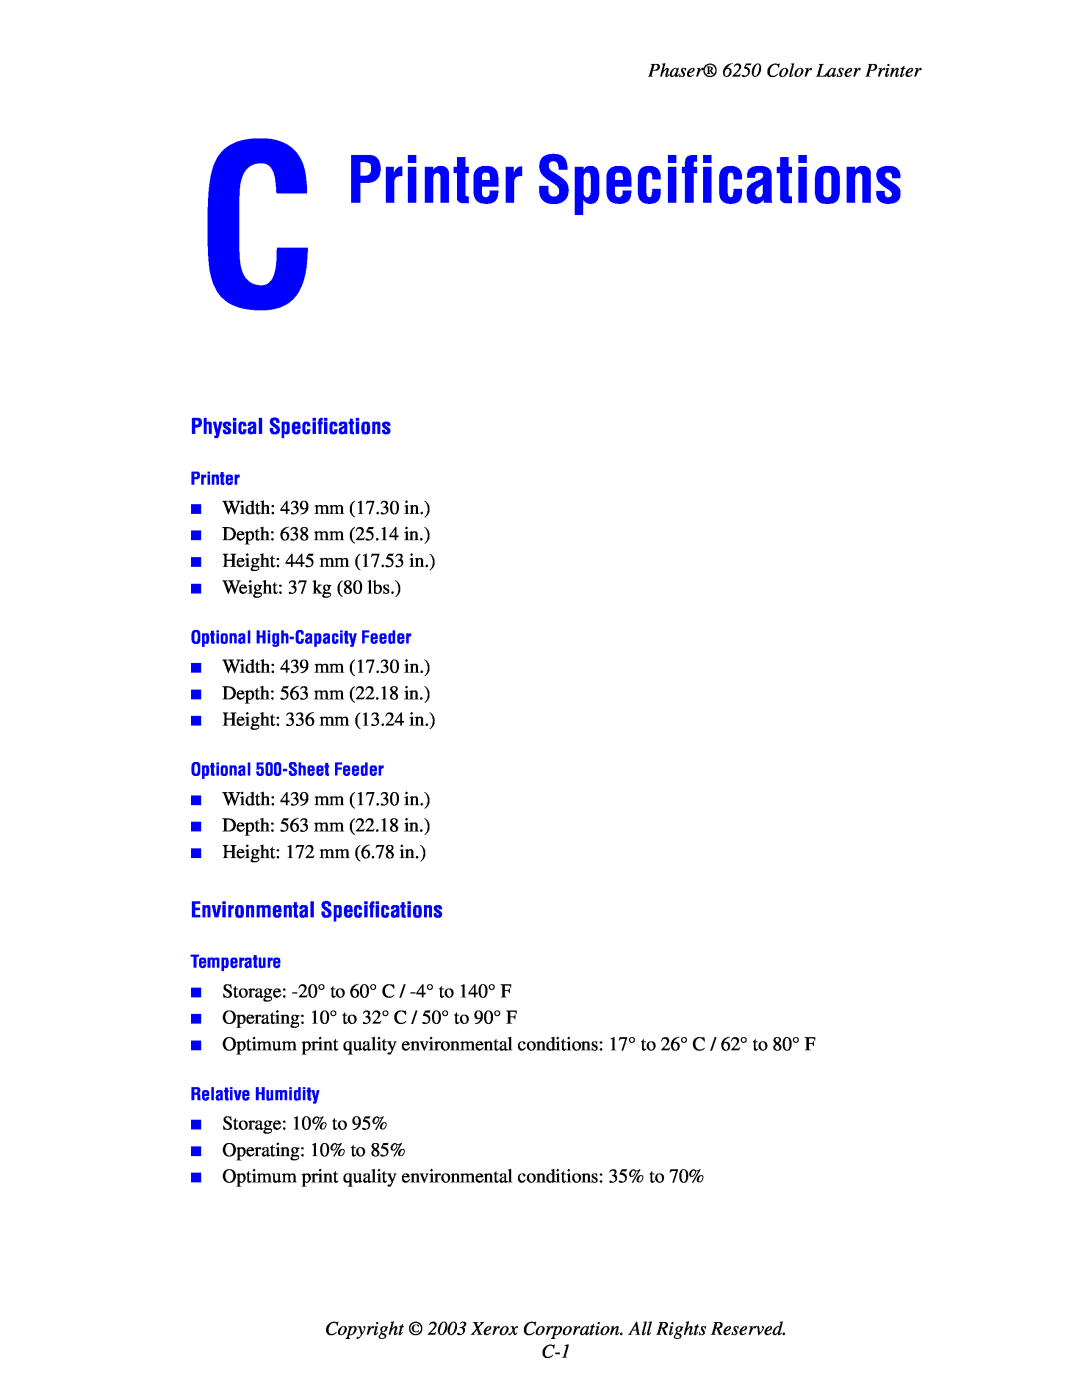 Xerox Printer Specifications, Physical Specifications, Environmental Specifications, Phaser 6250 Color Laser Printer 